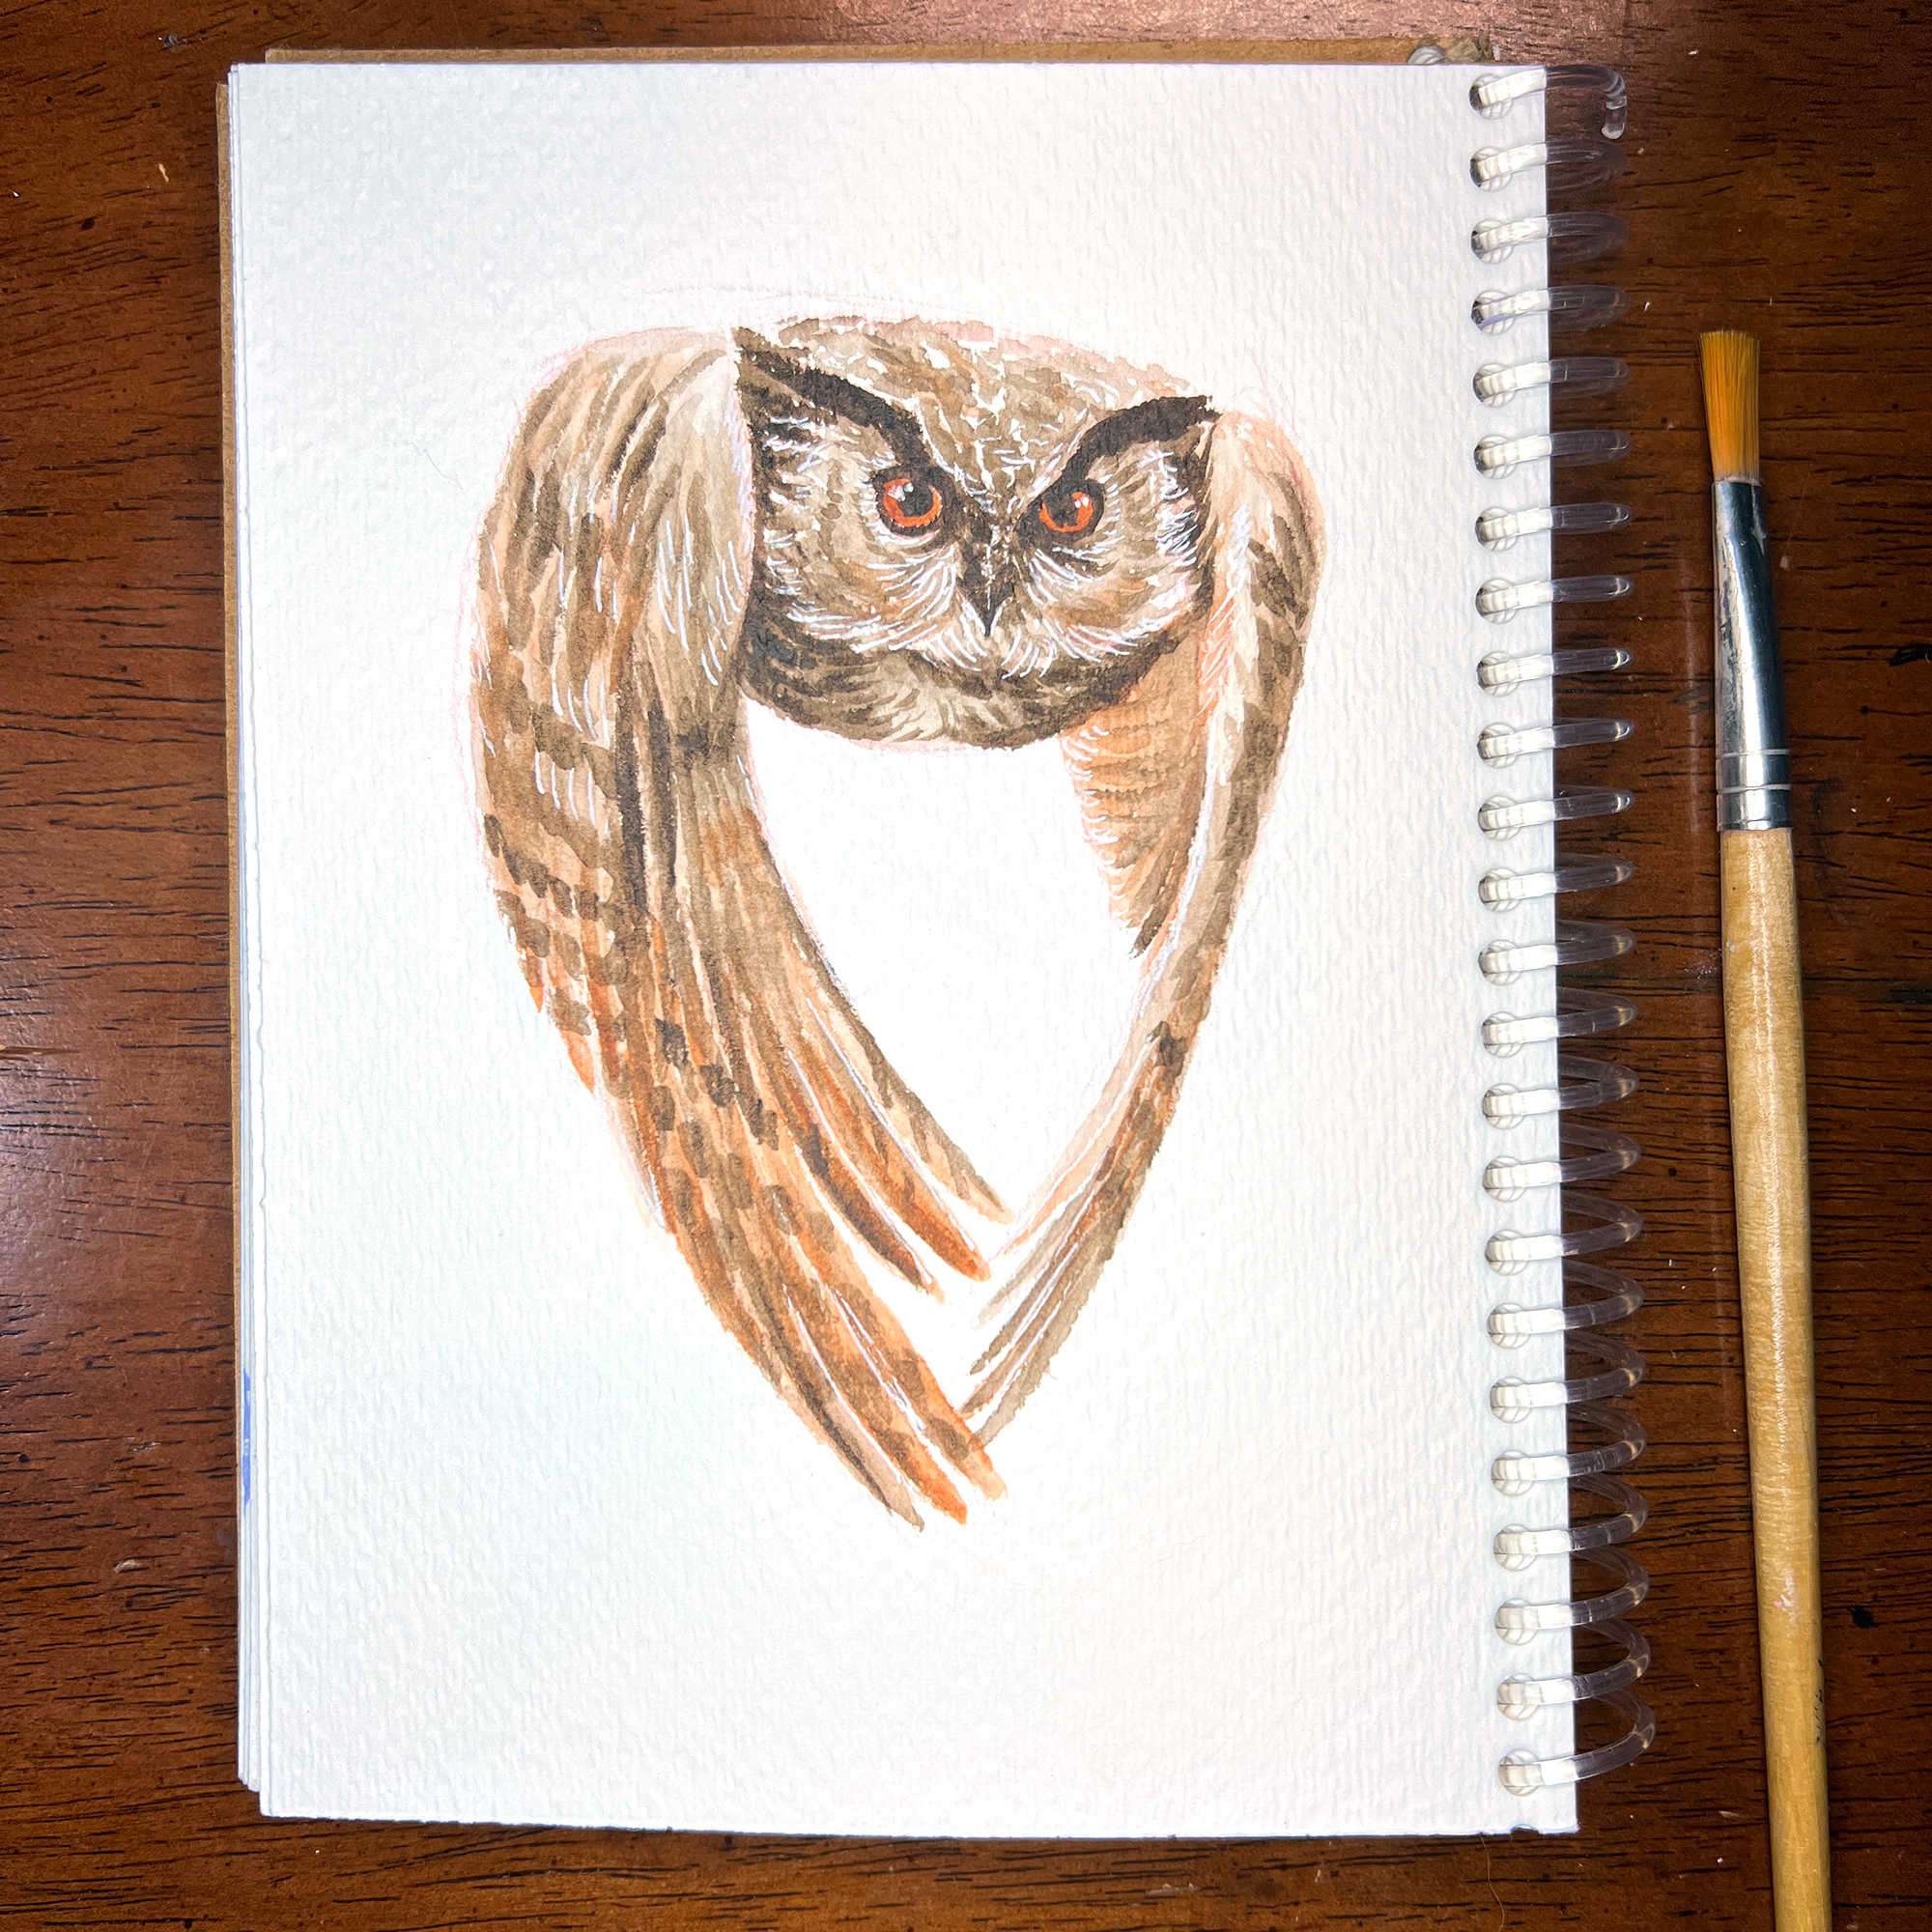 Owl/Rooster - Original Watercolor Painting of an owl on a spiral notebook, with a paintbrush resting beside it on a wooden table.